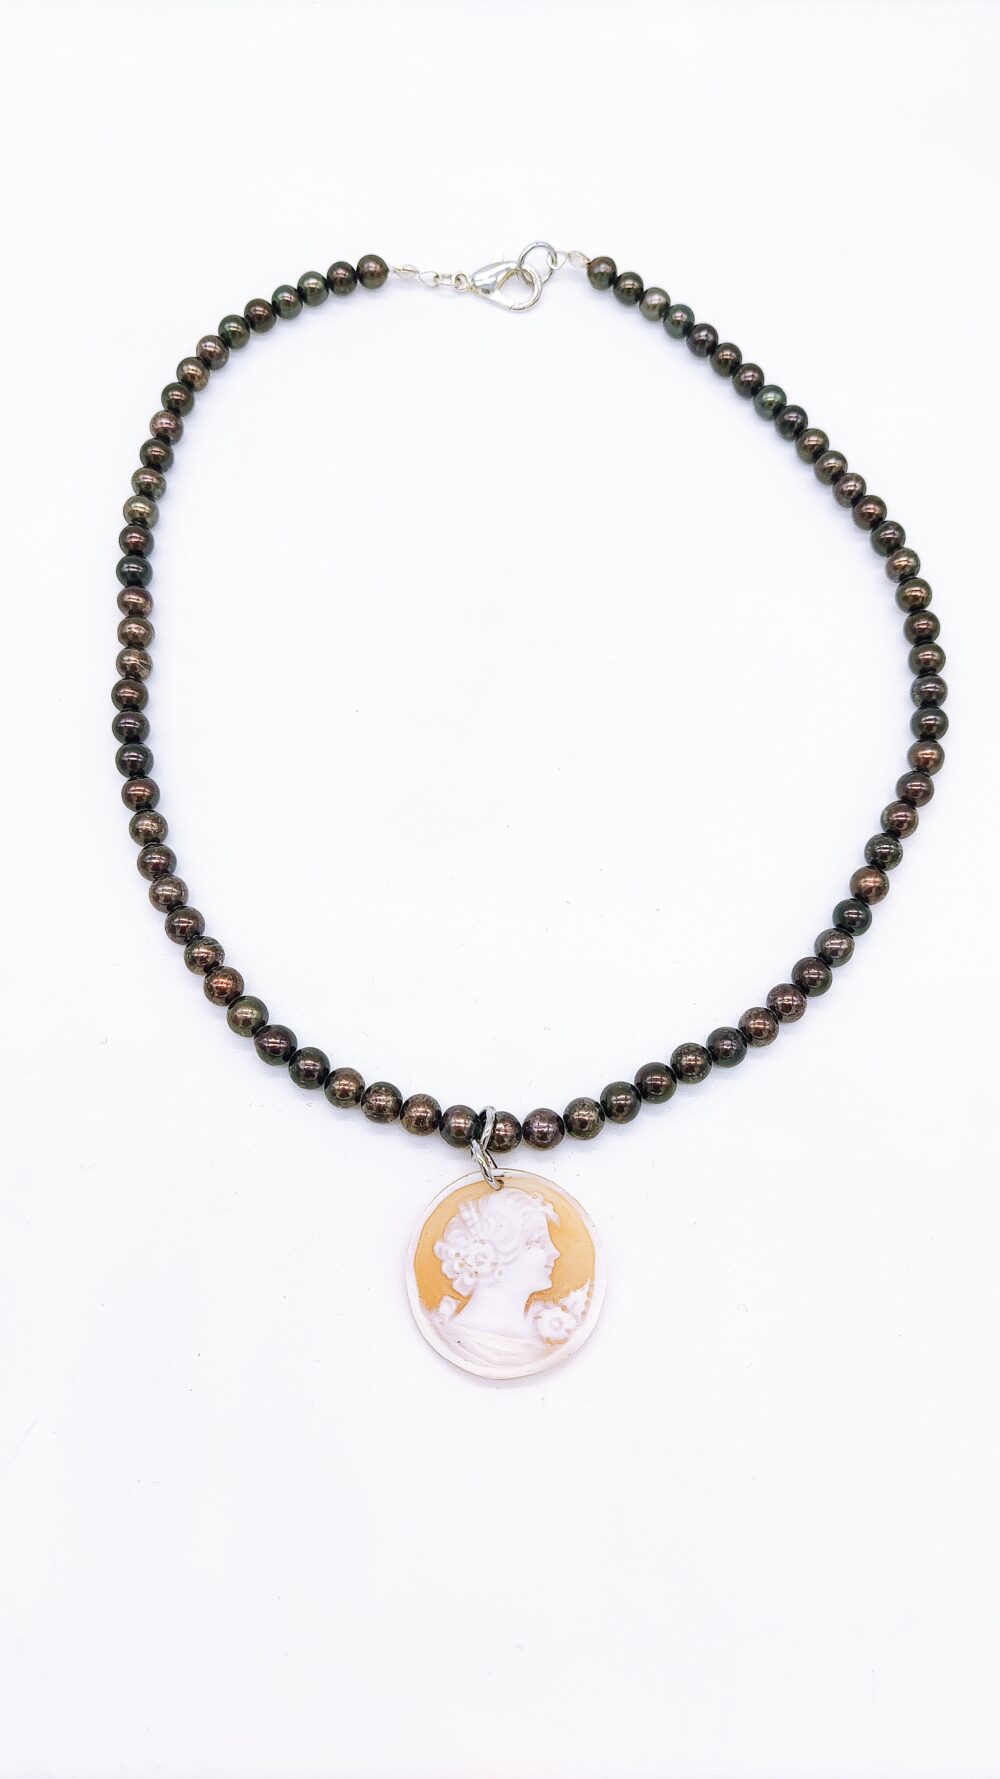 Necklace brown pearls and Cameo pendant 3